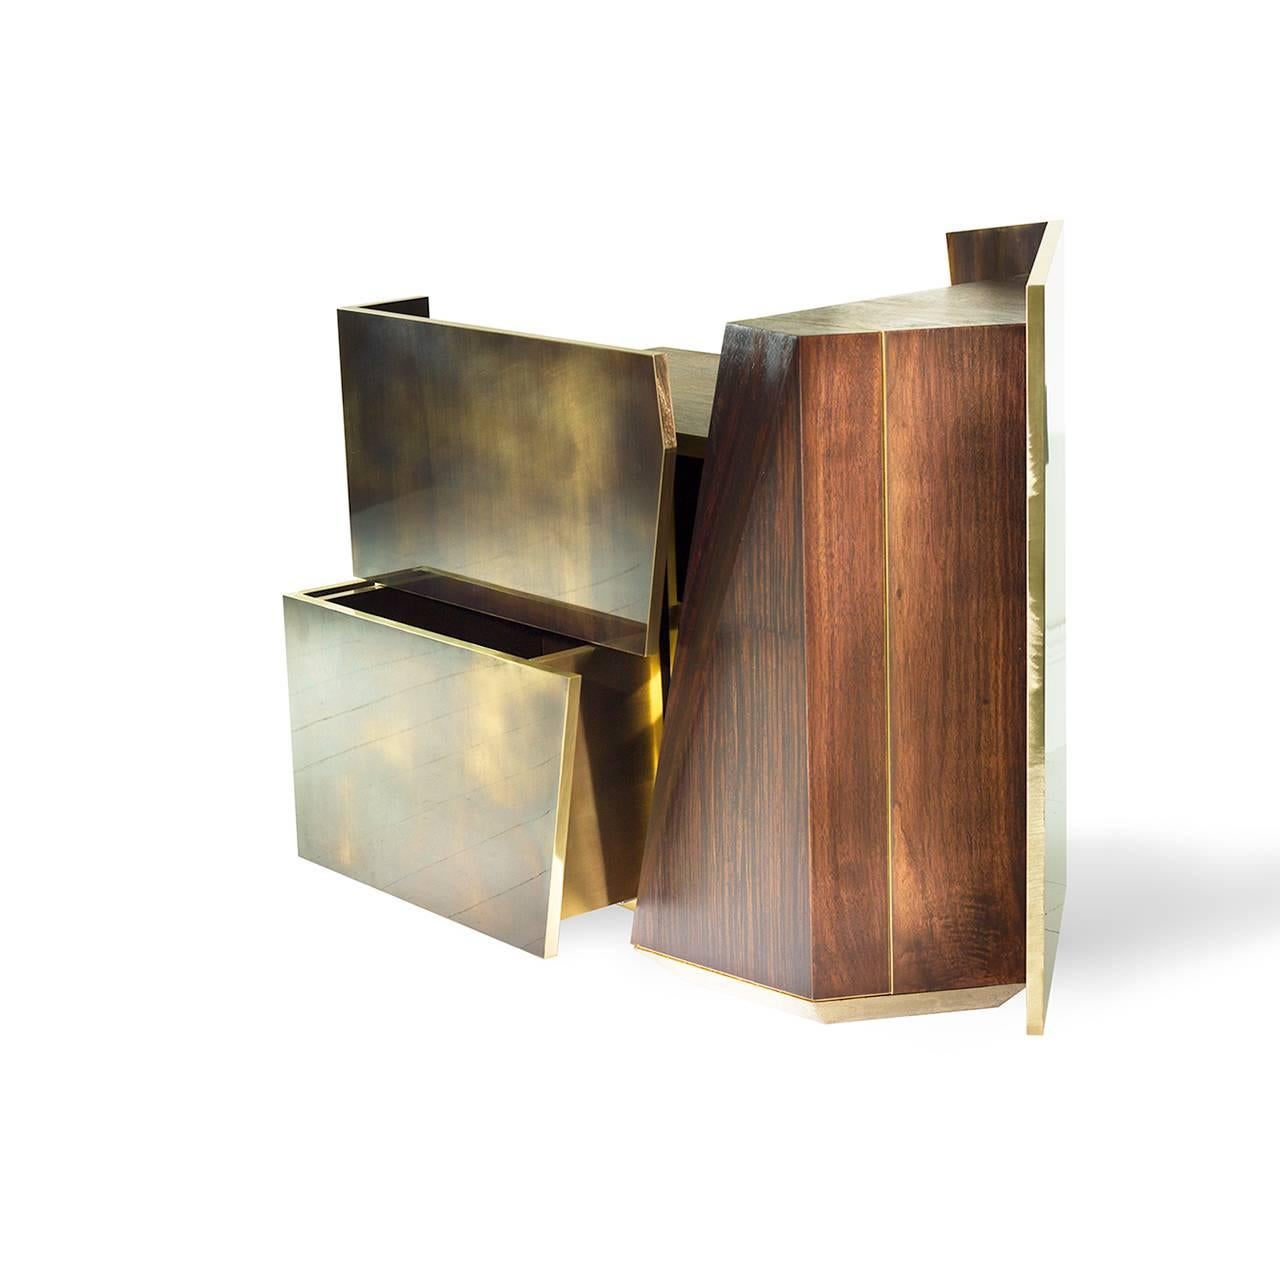 A work of art for the bedside, this modern piece uses angled and contrasting lines to define its drawers and hidden cabinet space. Hand finished solid brass, blackened chrome and solid walnut, teak and mahogany woods combine to define its forceful